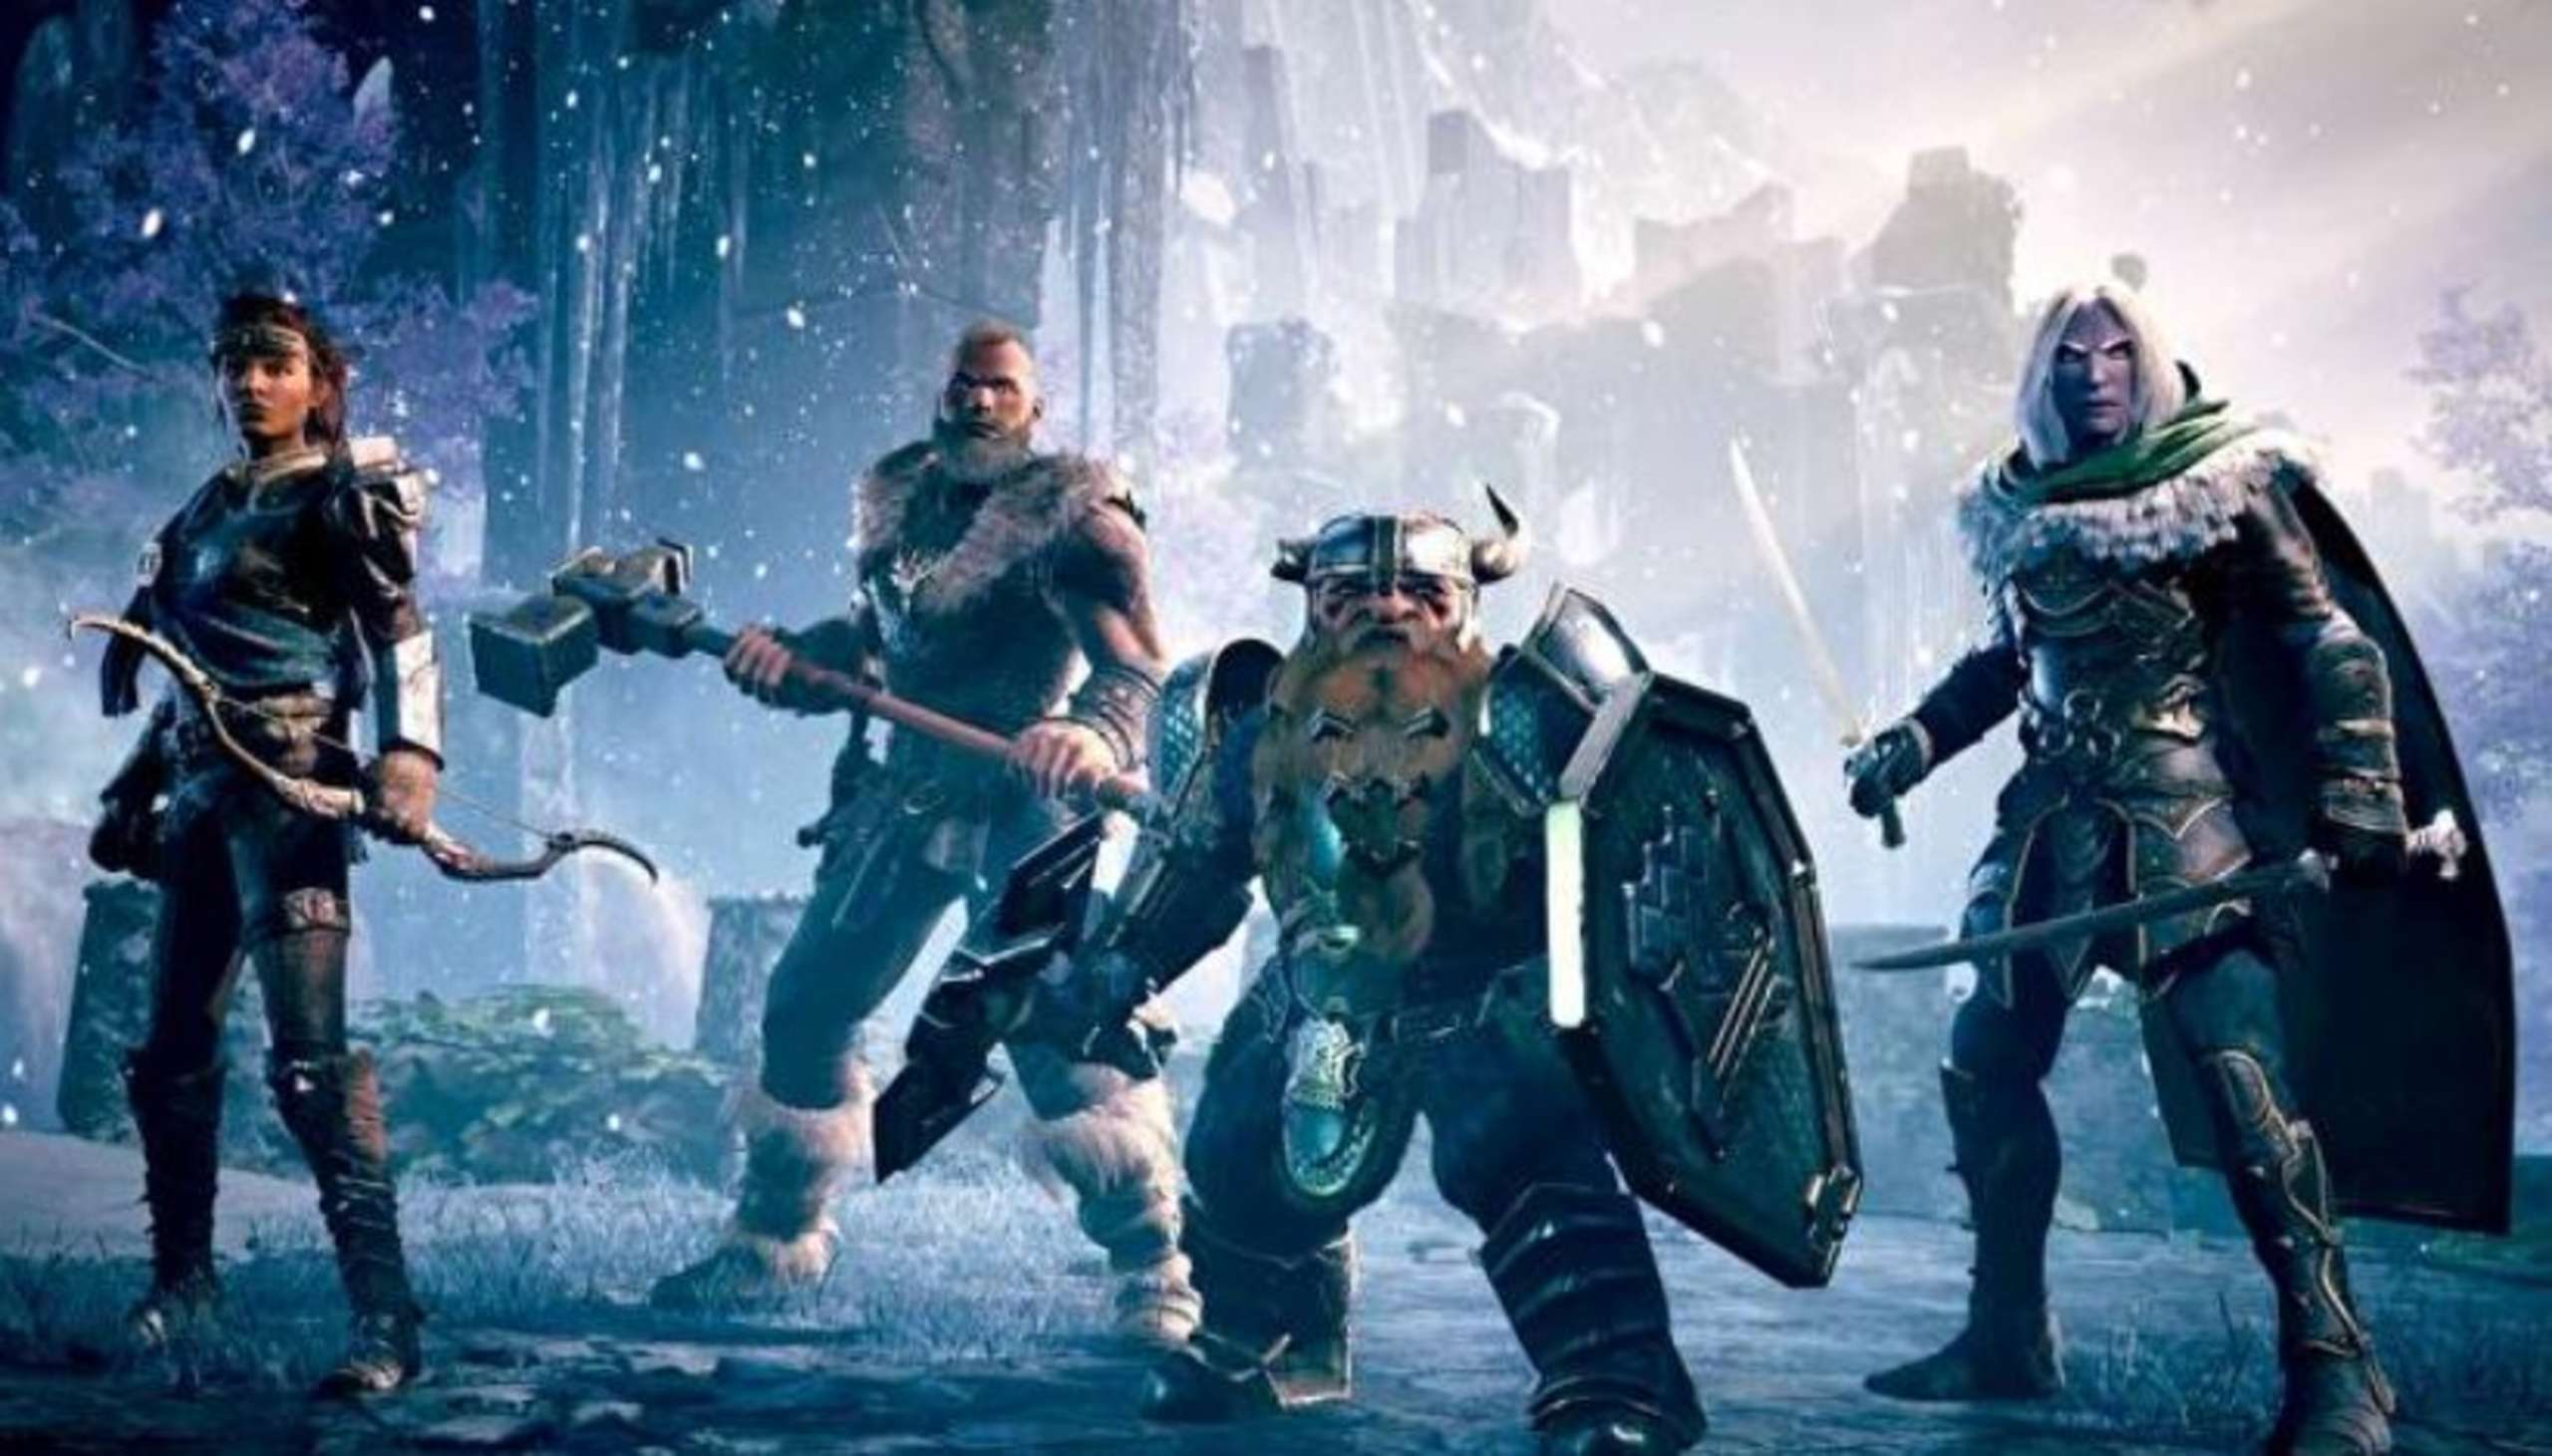 A New Video Game Is Being Developed With Unreal Engine 5 To Bring The Popular Dungeons & Dragons Fantasy Role-Playing Game To Life